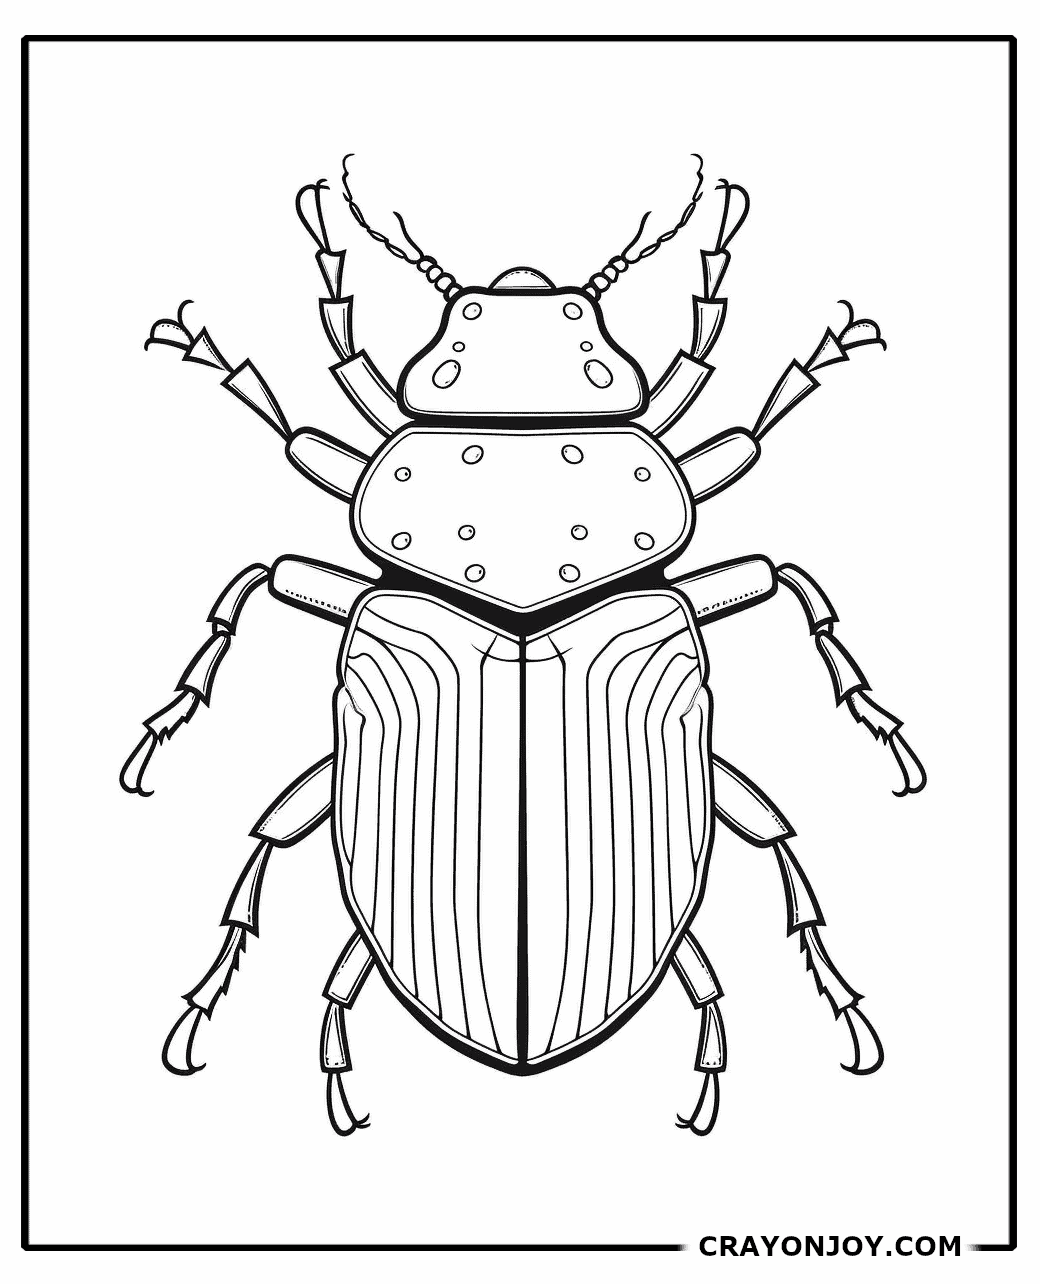 Free Printable Beetle Coloring Pages for Kids & Adults